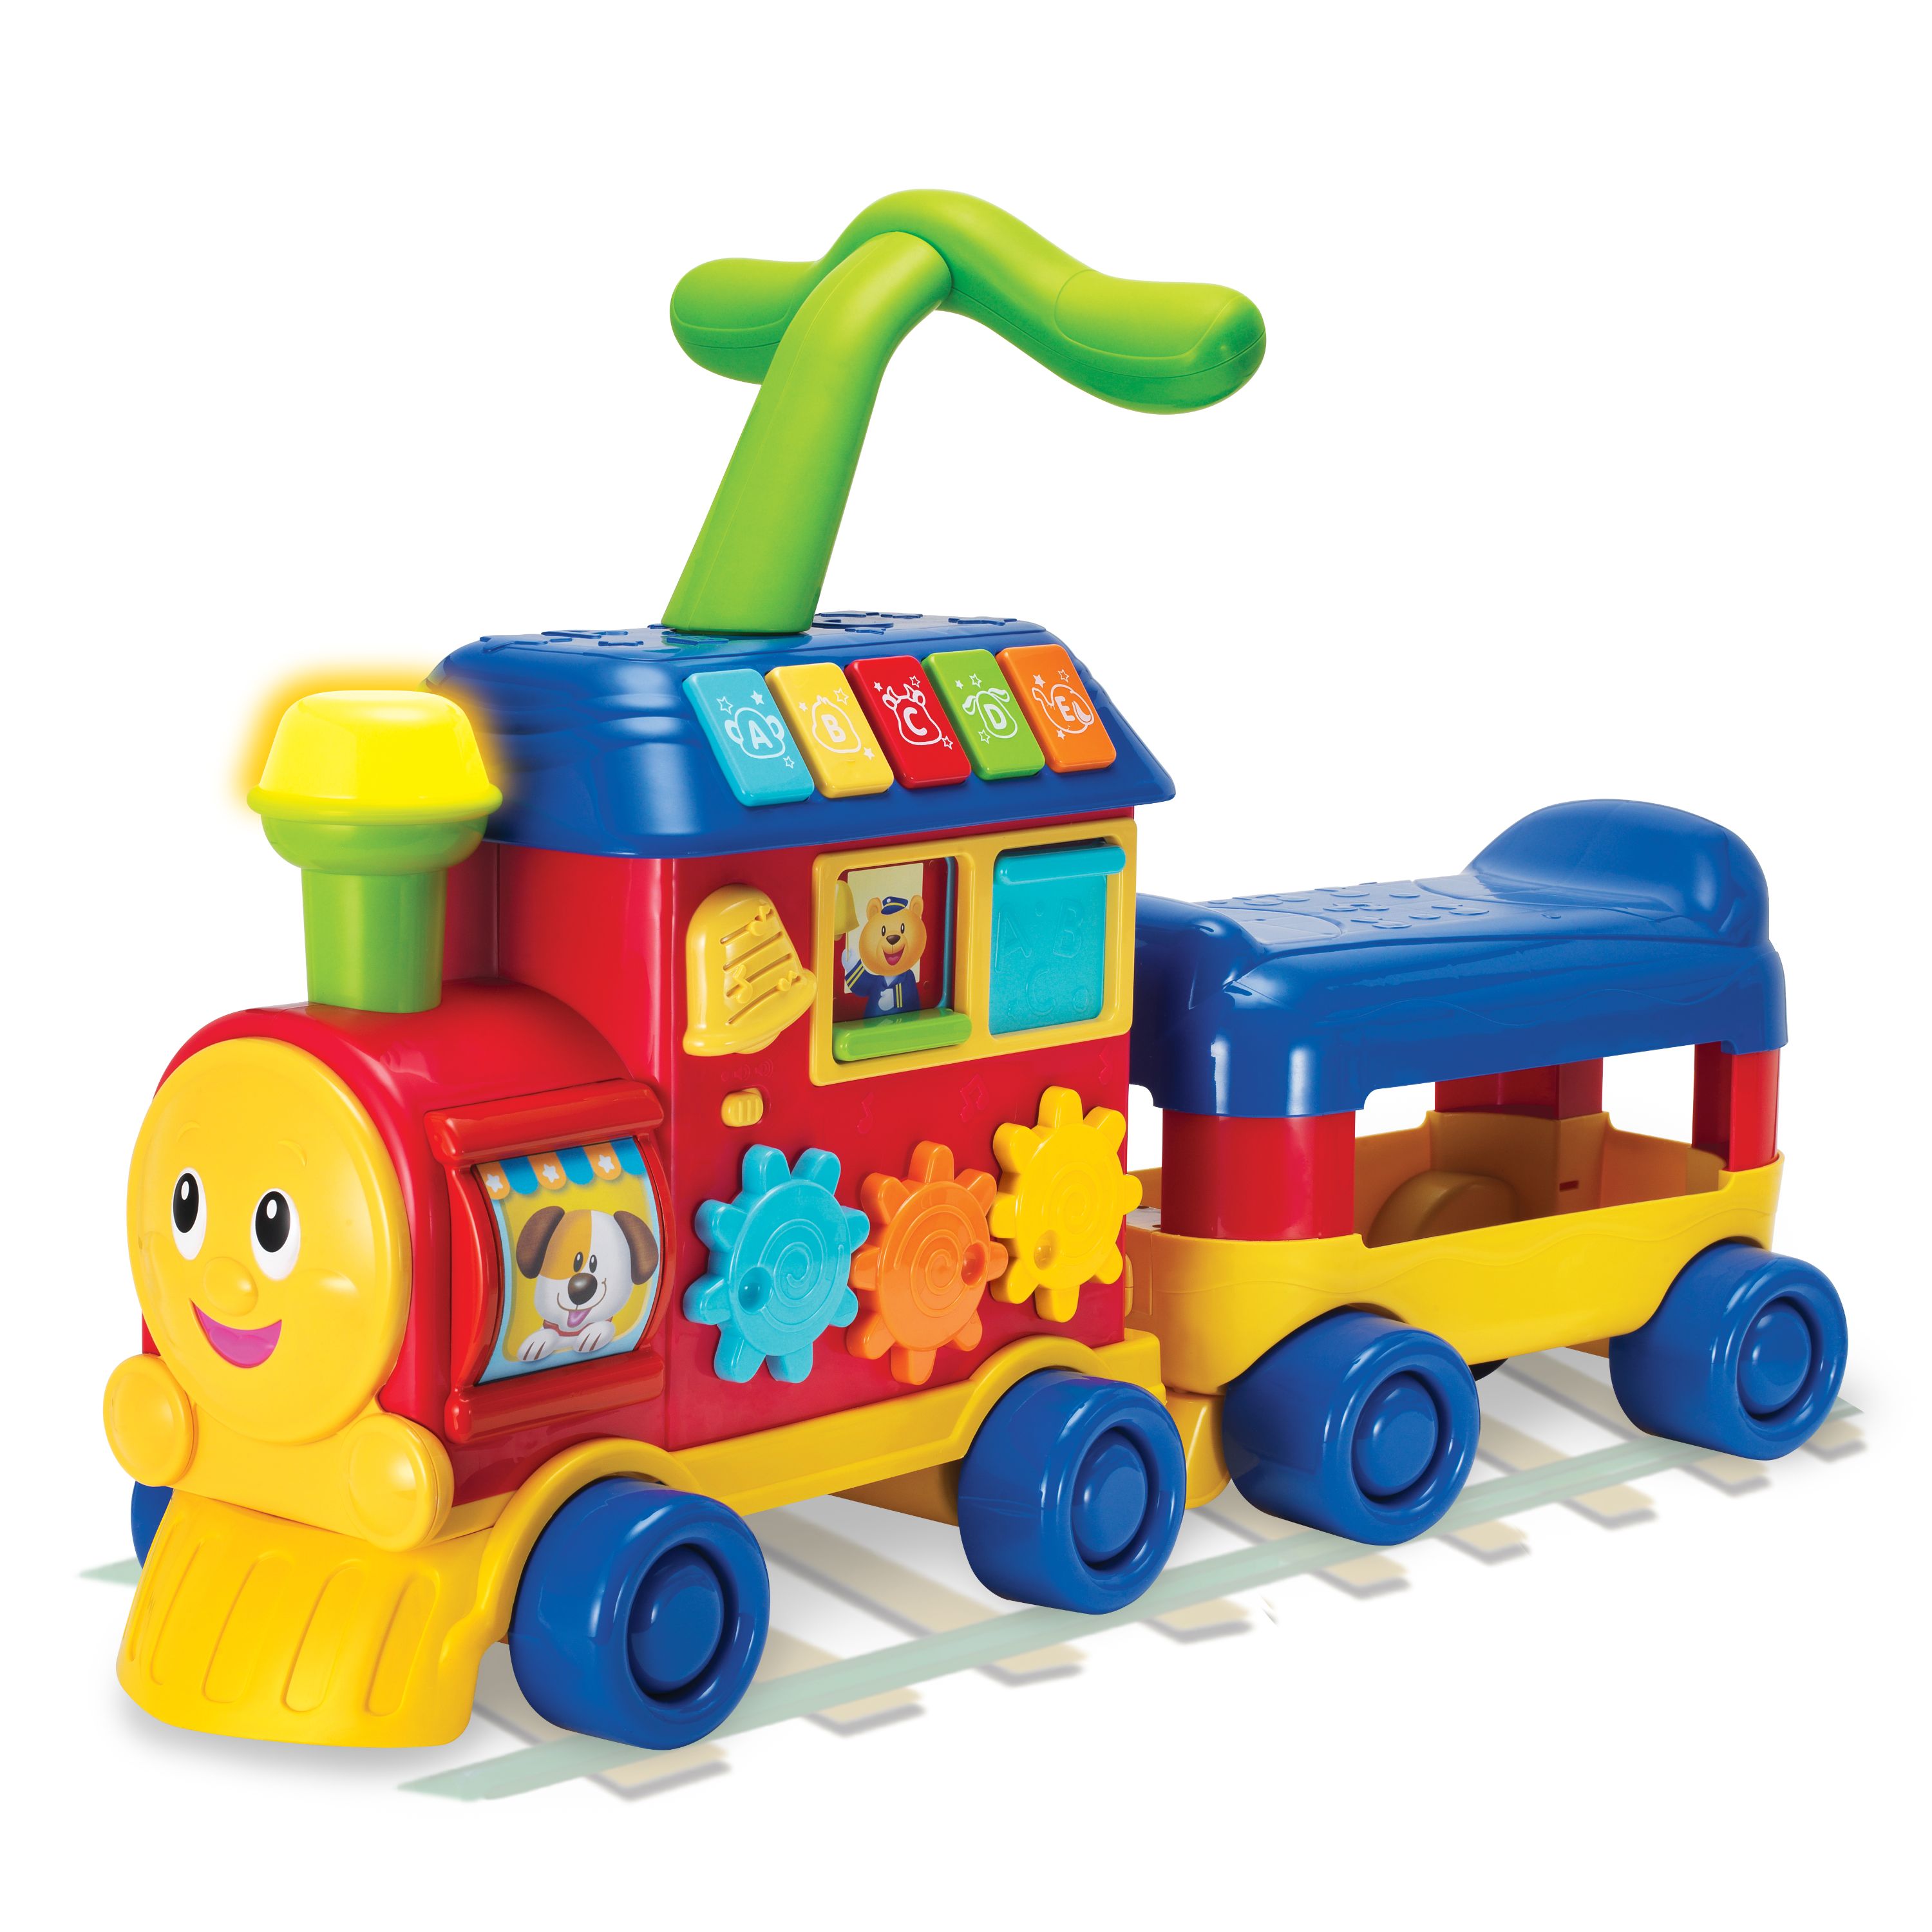 Brilliant Beginnings - Ride on Electronic Learning Train - image 1 of 3